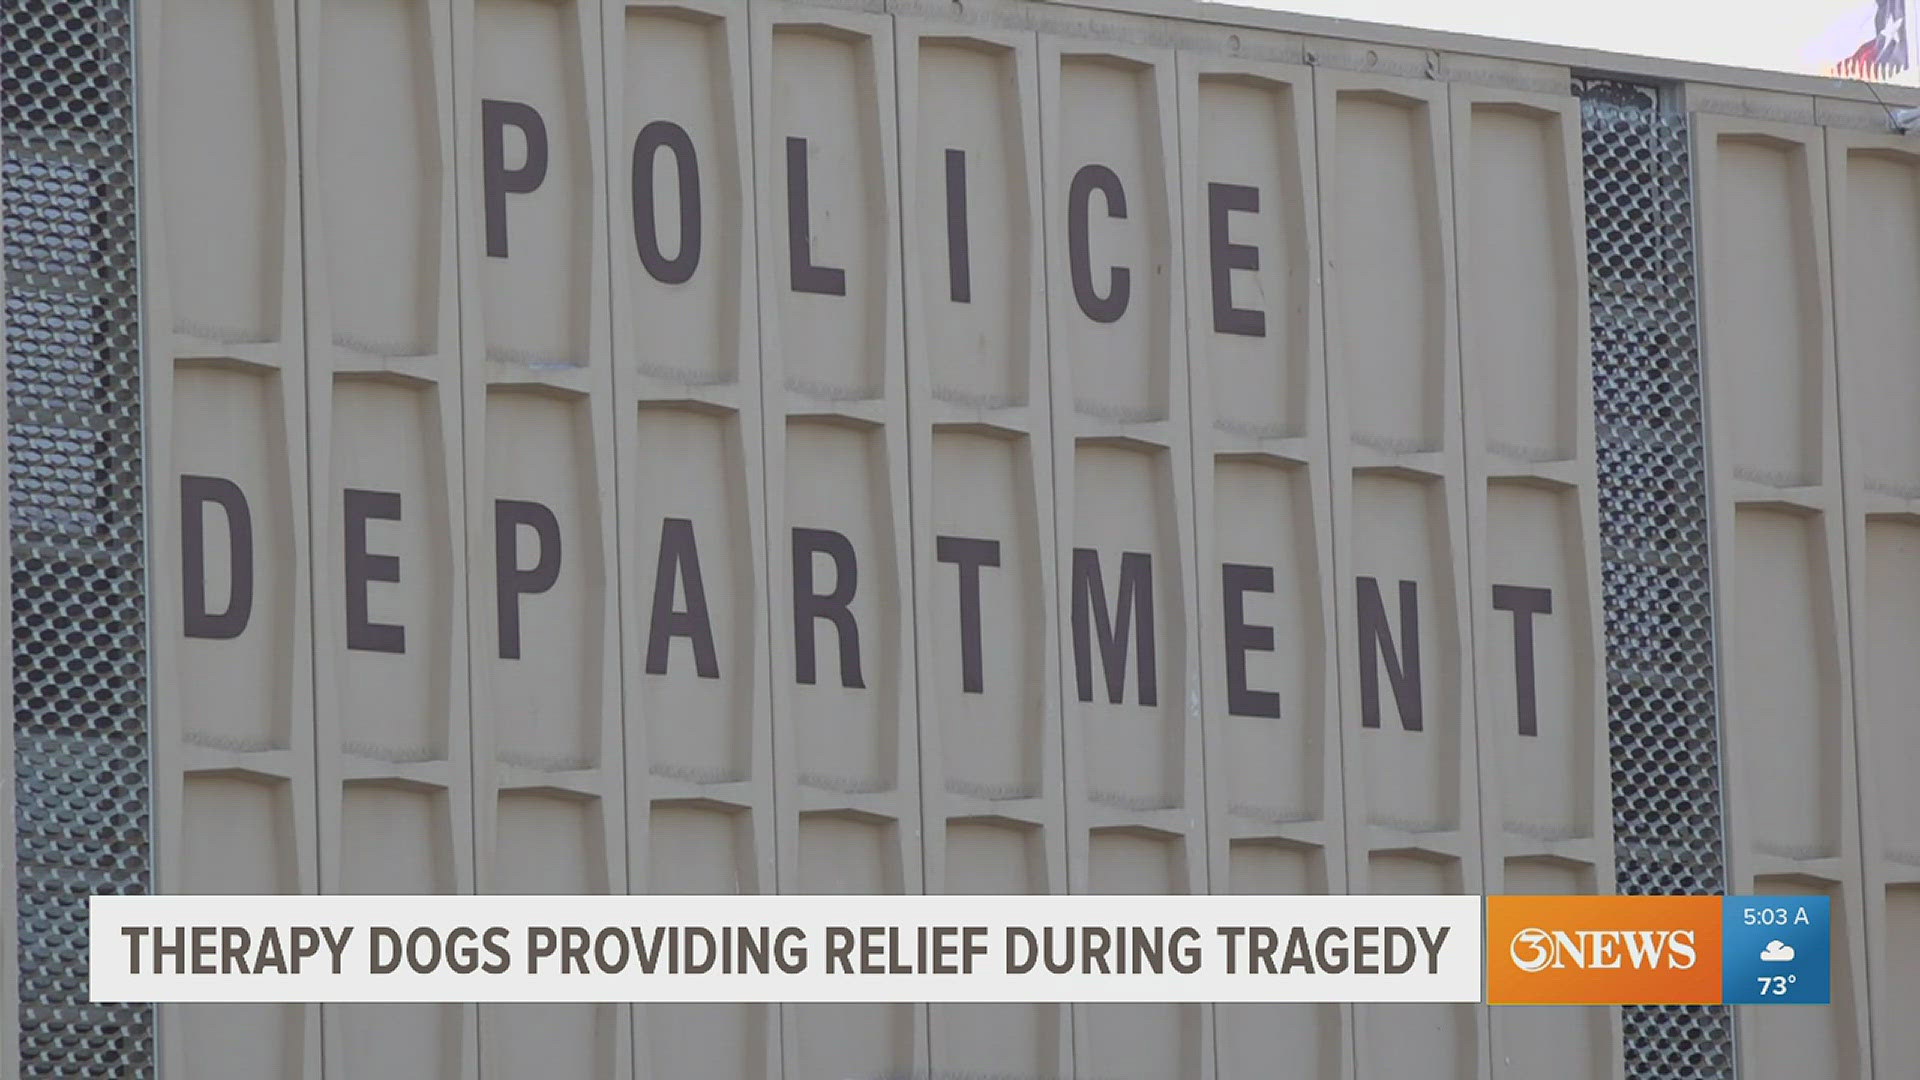 Go Team therapy dogs were at the CCPD Headquarters Wednesday night to provide relief to officers.